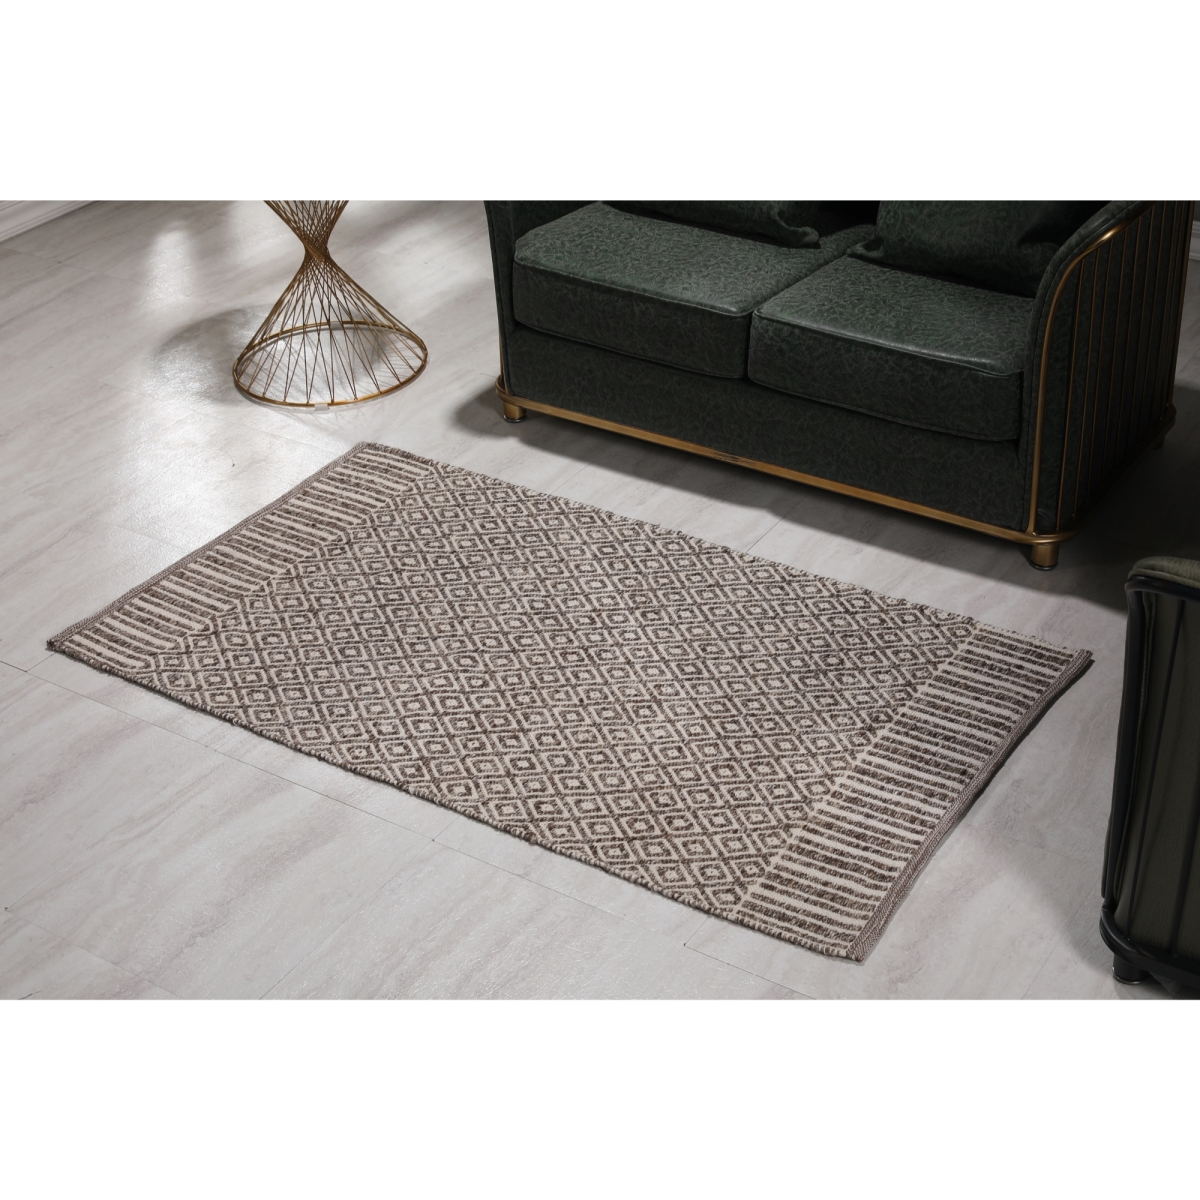 Whtxr638-m 3 X 5 Ft. Handwoven Cotton & Viscose Rug, Brown & White